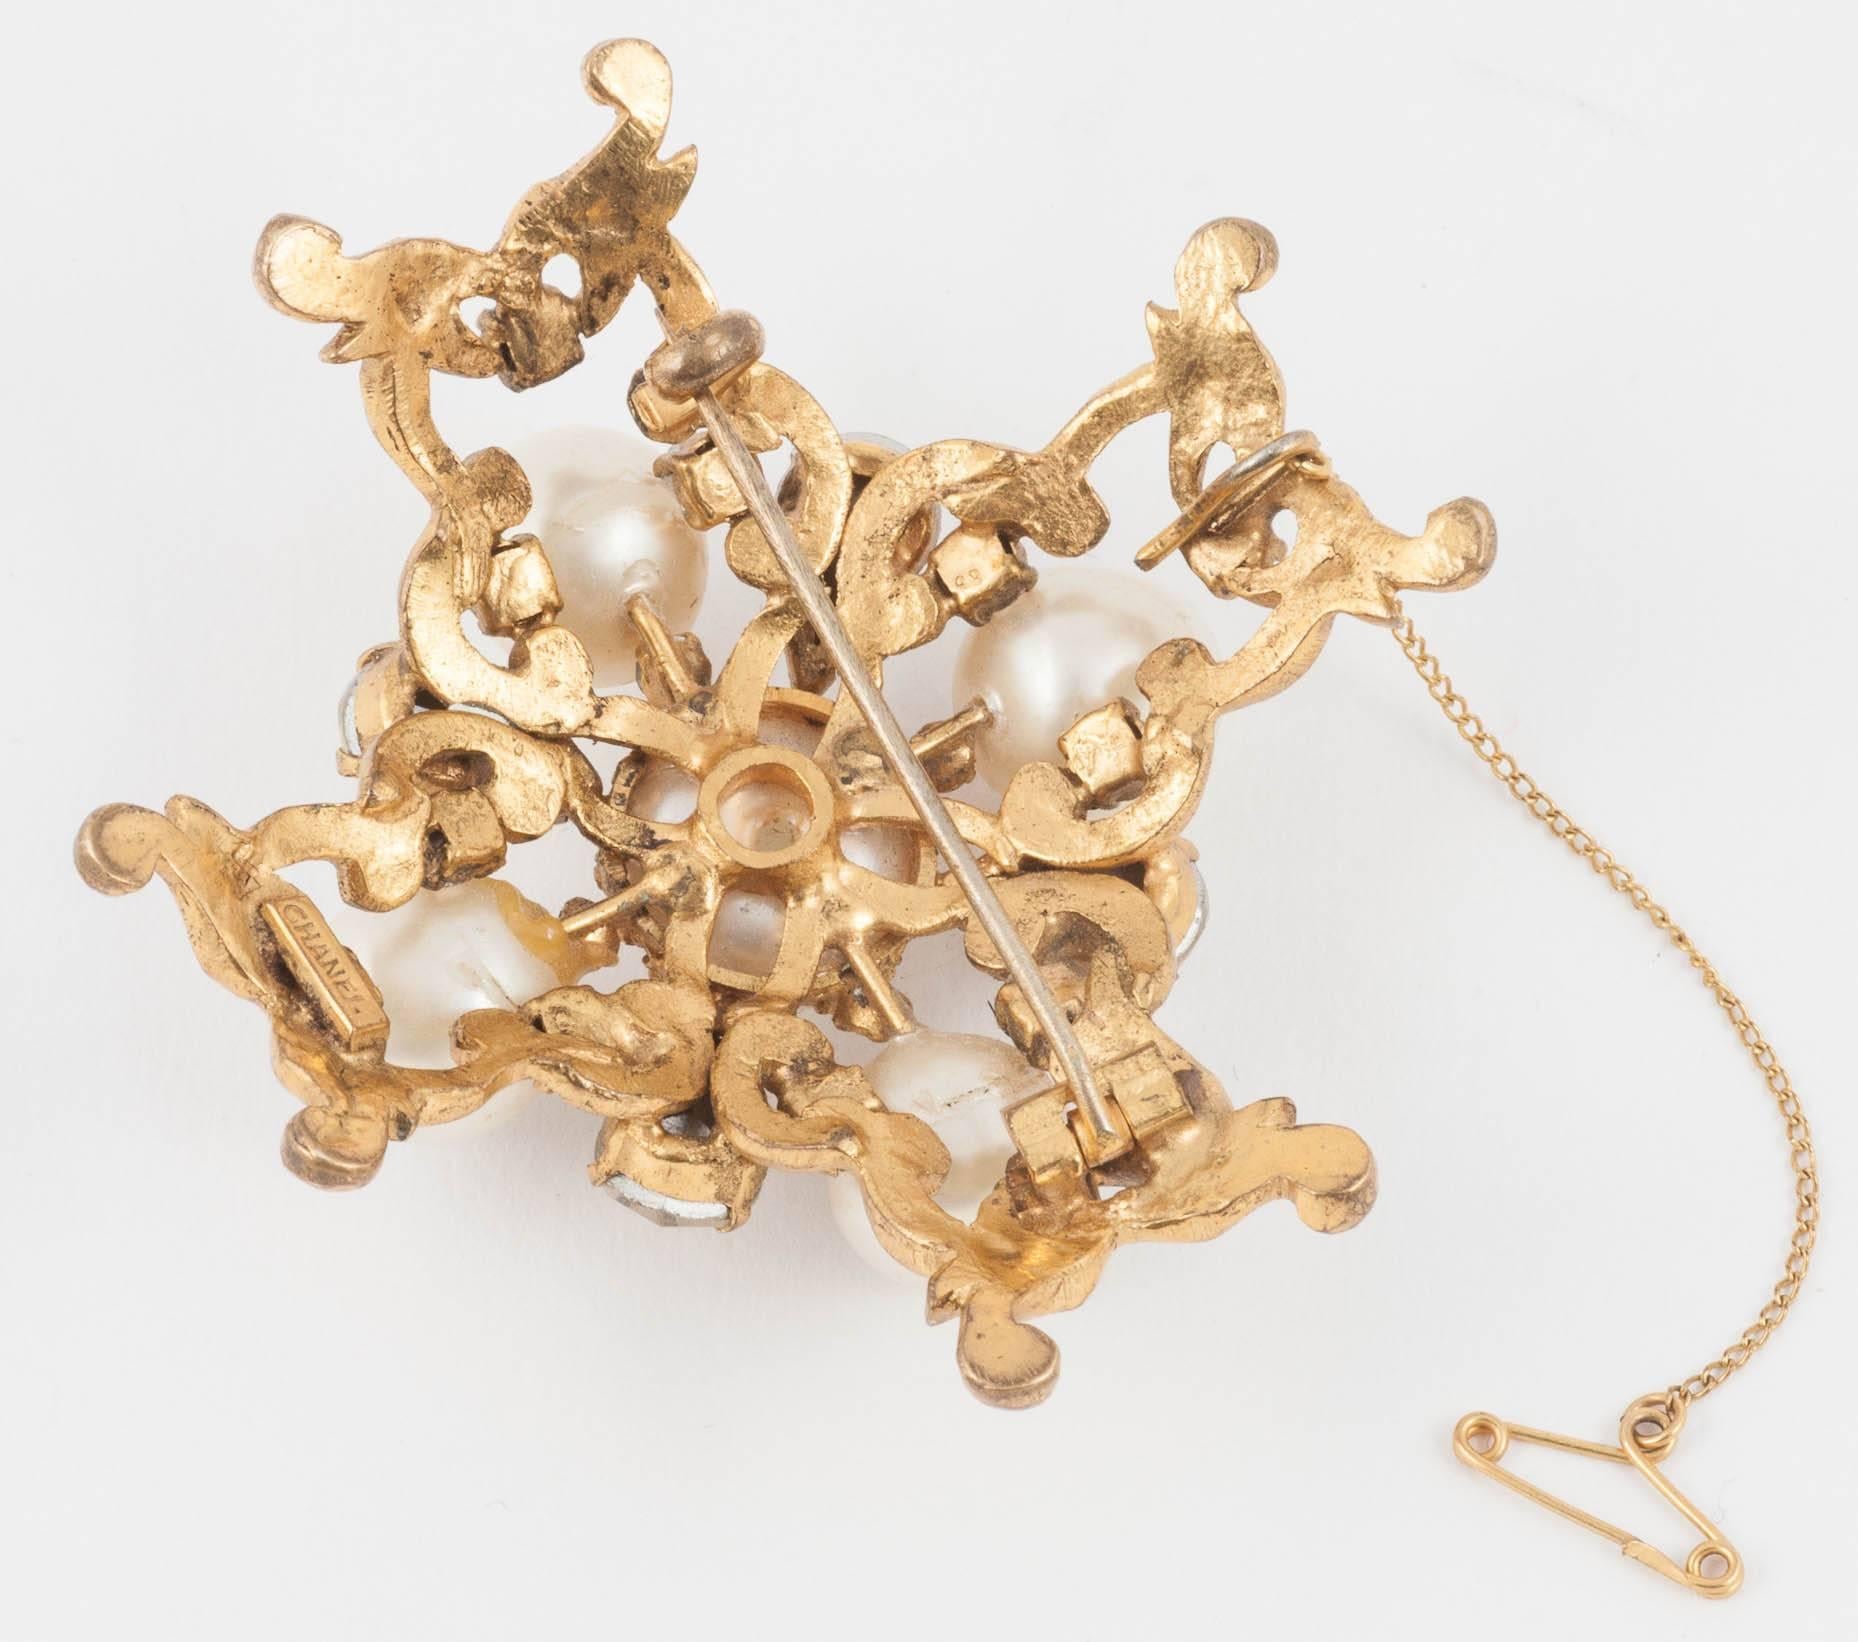 A very rare and early Chanel brooch from the 1950s, made for Chanel by Maison Goossens, the celebrated artisan, when the atelier was still 'young' with a team of no more than 7 or 8 jewellers, producing exquisite handmade pieces , designed by Chanel